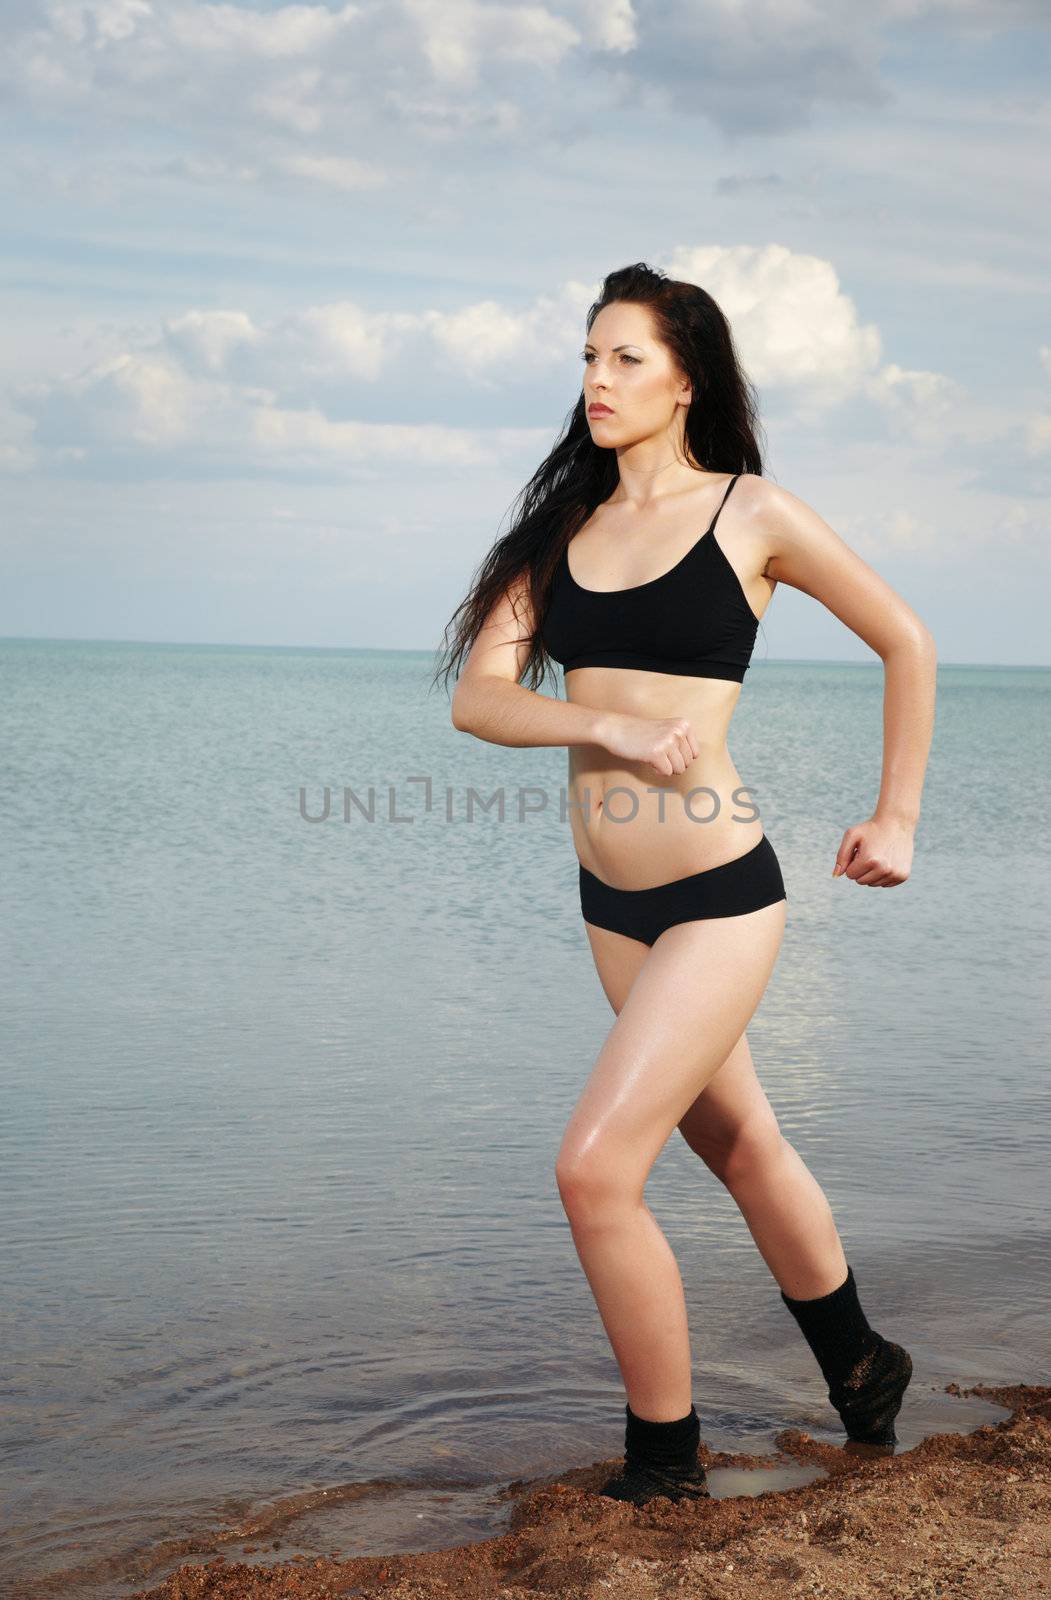 Lady outdoors with muscular figure running along the beach